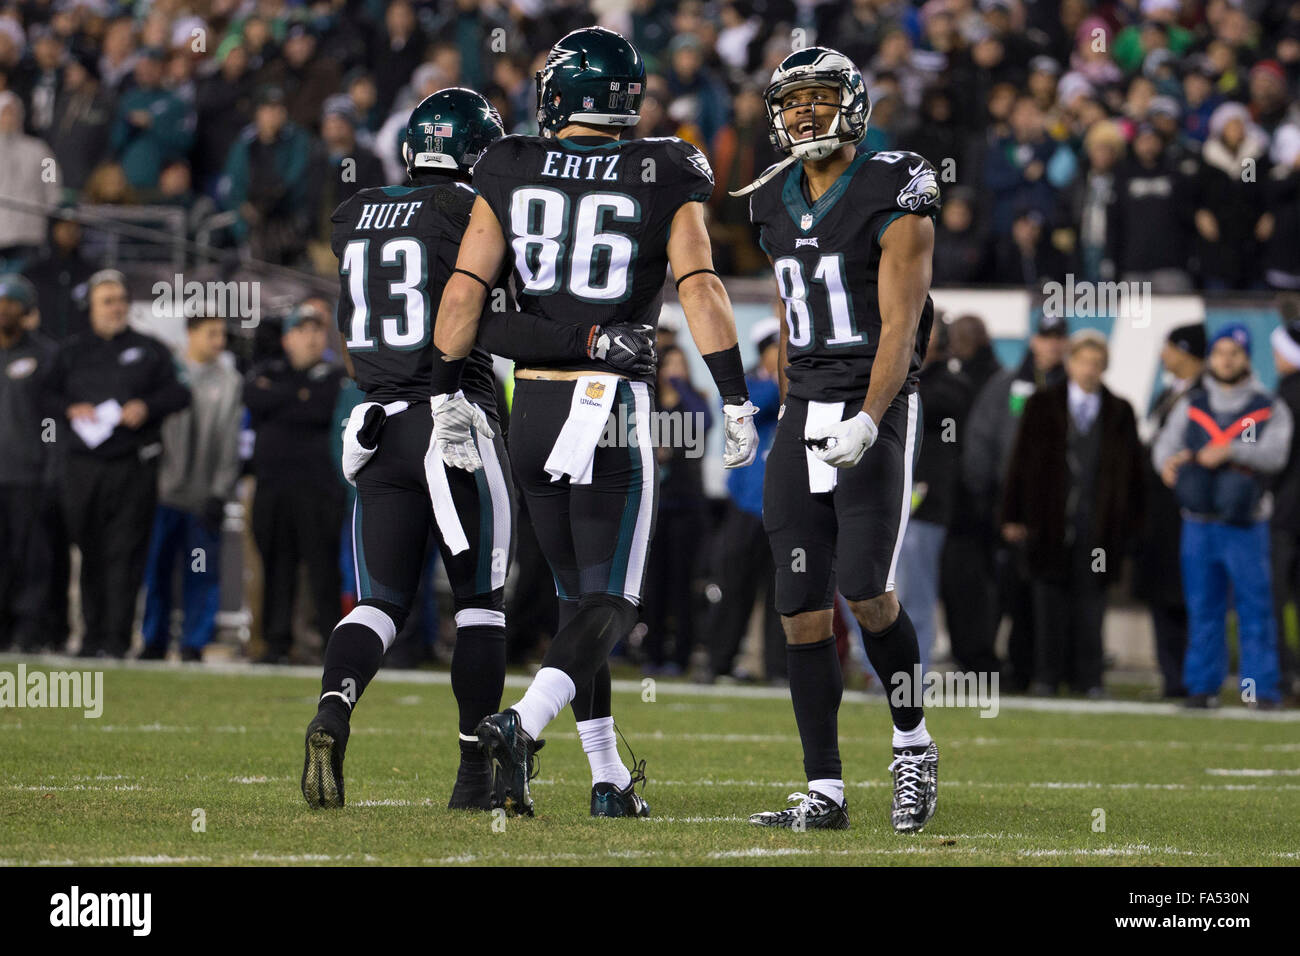 Philadelphia, Pennsylvania, USA. 20th Dec, 2015. Philadelphia Eagles wide receiver Jordan Matthews (81) reacts to the no flag as tight end Zach Ertz (86) walks back to the sidelines with wide receiver Josh Huff (13) during the NFL game between the Arizona Cardinals and the Philadelphia Eagles at Lincoln Financial Field in Philadelphia, Pennsylvania. The Arizona Cardinals won 40-17. The Arizona Cardinals clinch the NFC West Division. Christopher Szagola/CSM/Alamy Live News Stock Photo